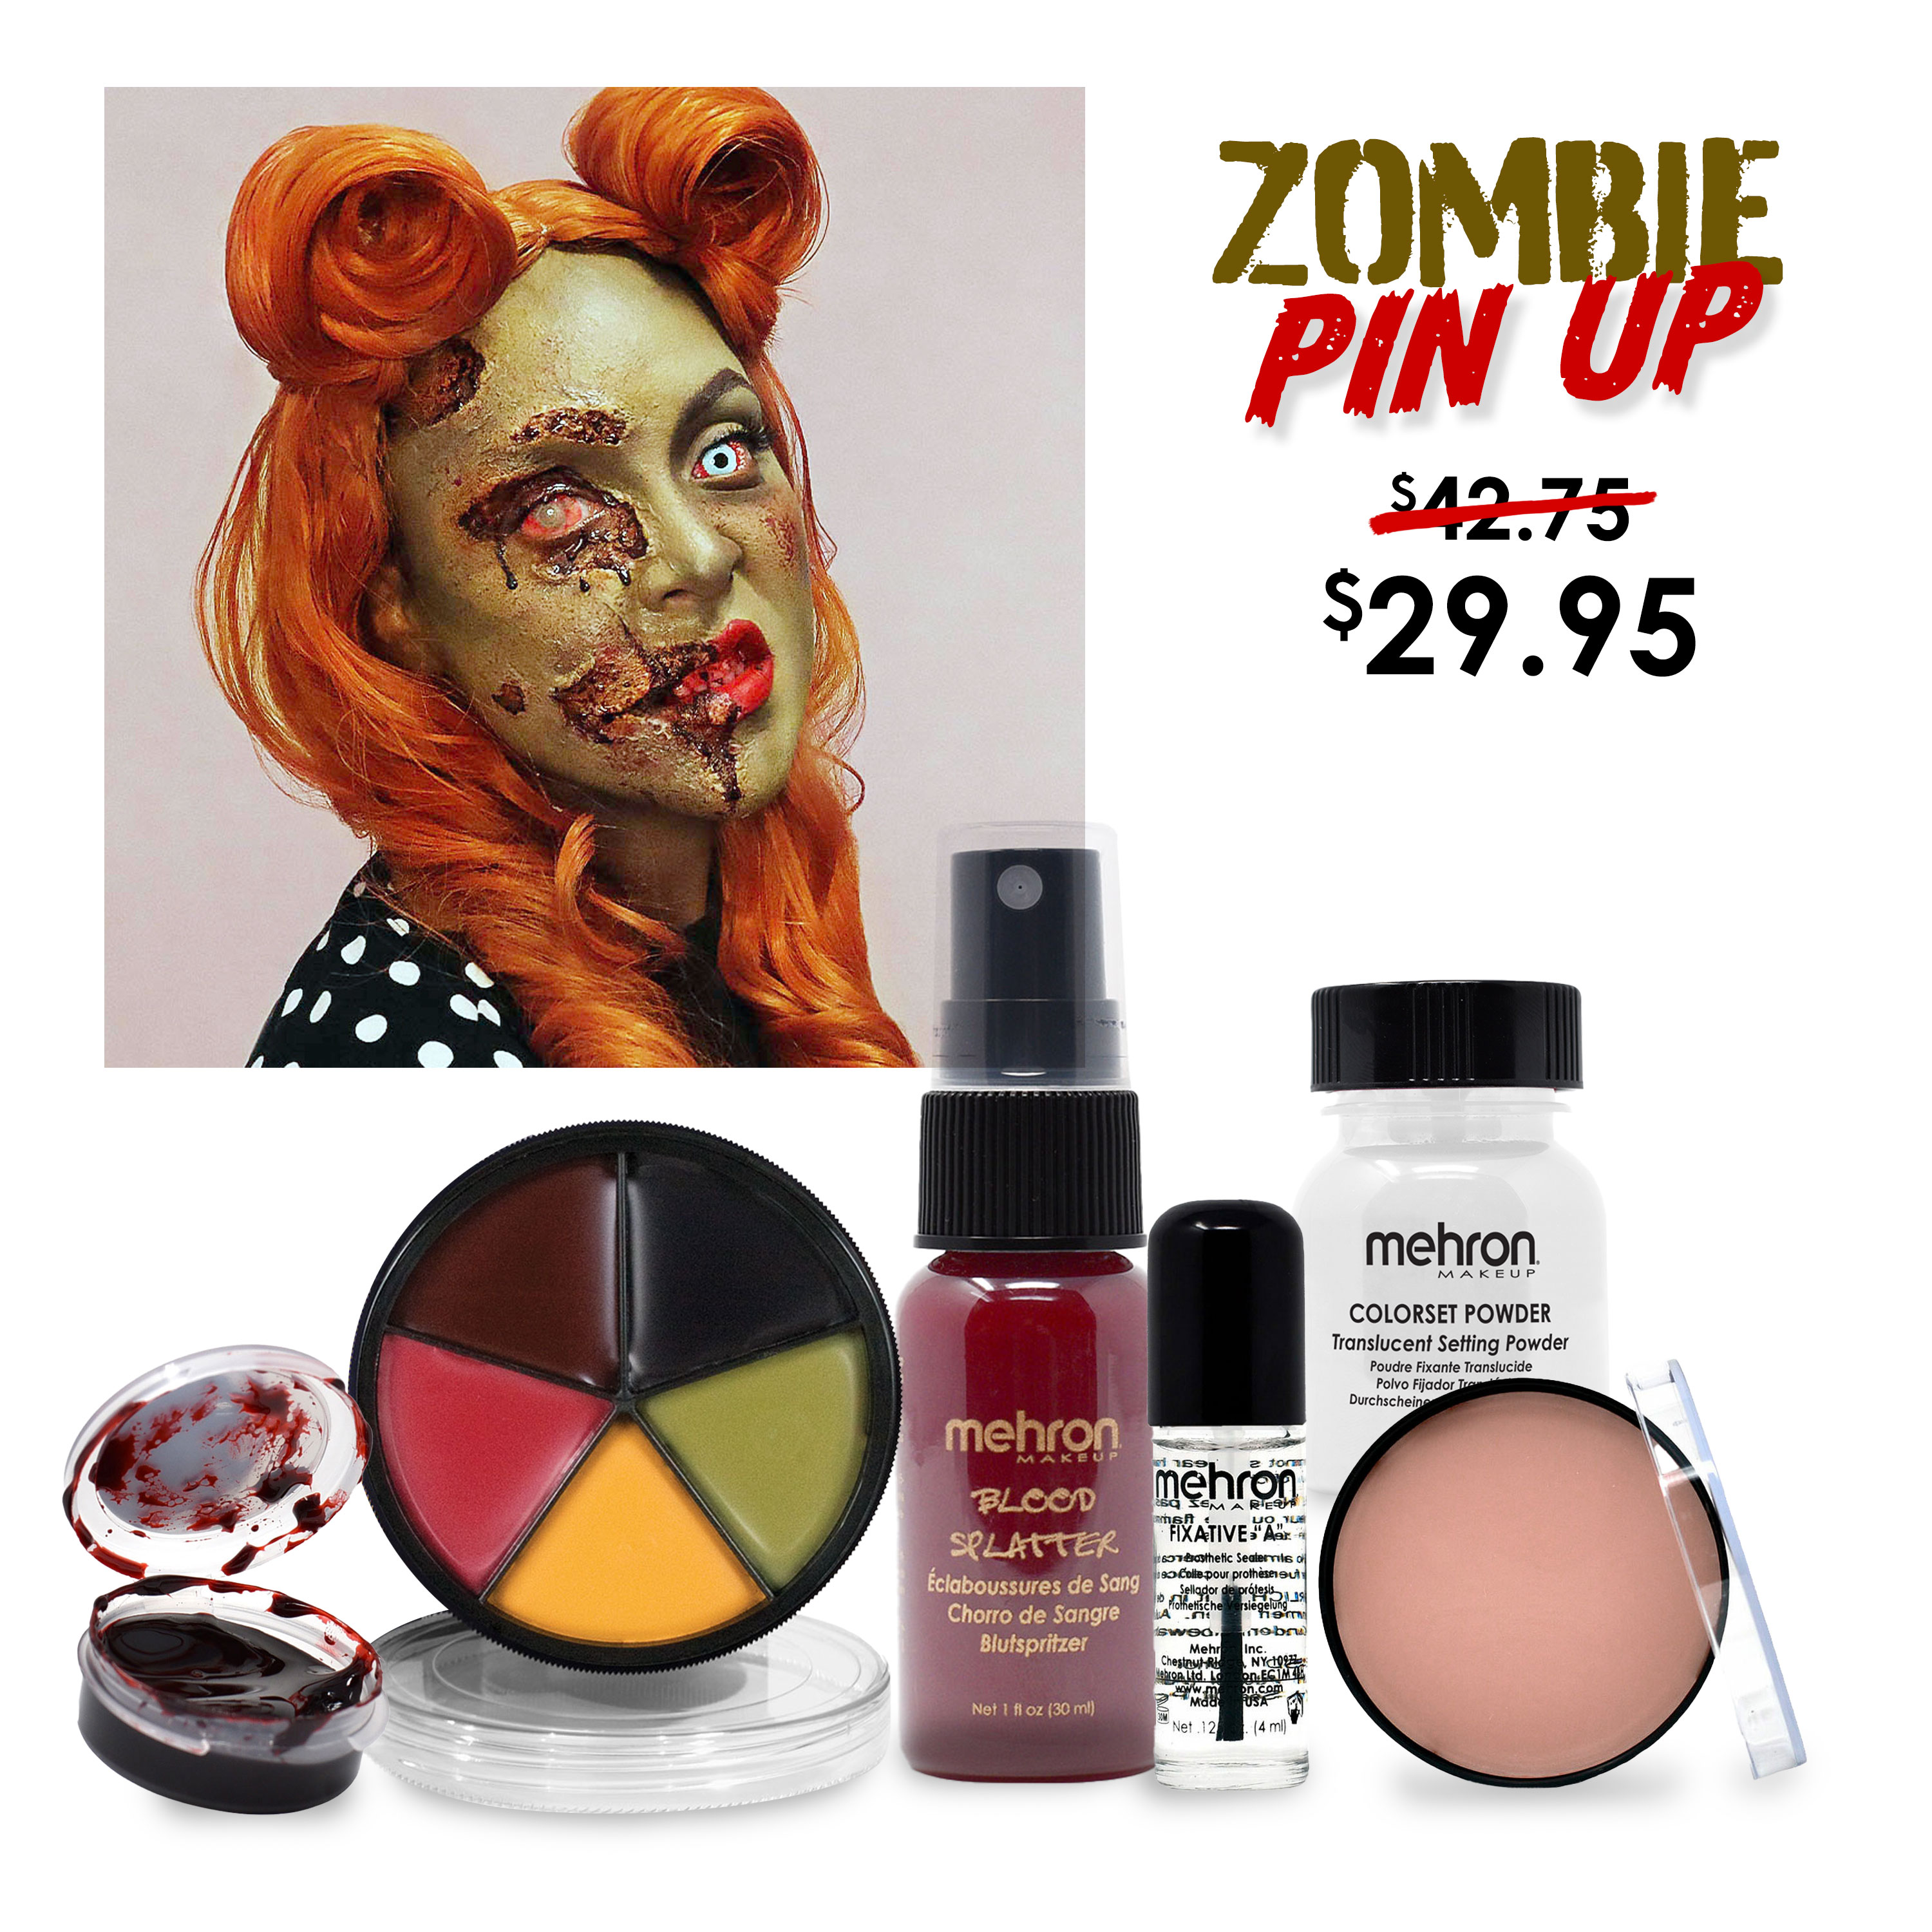 Zombie Pin up